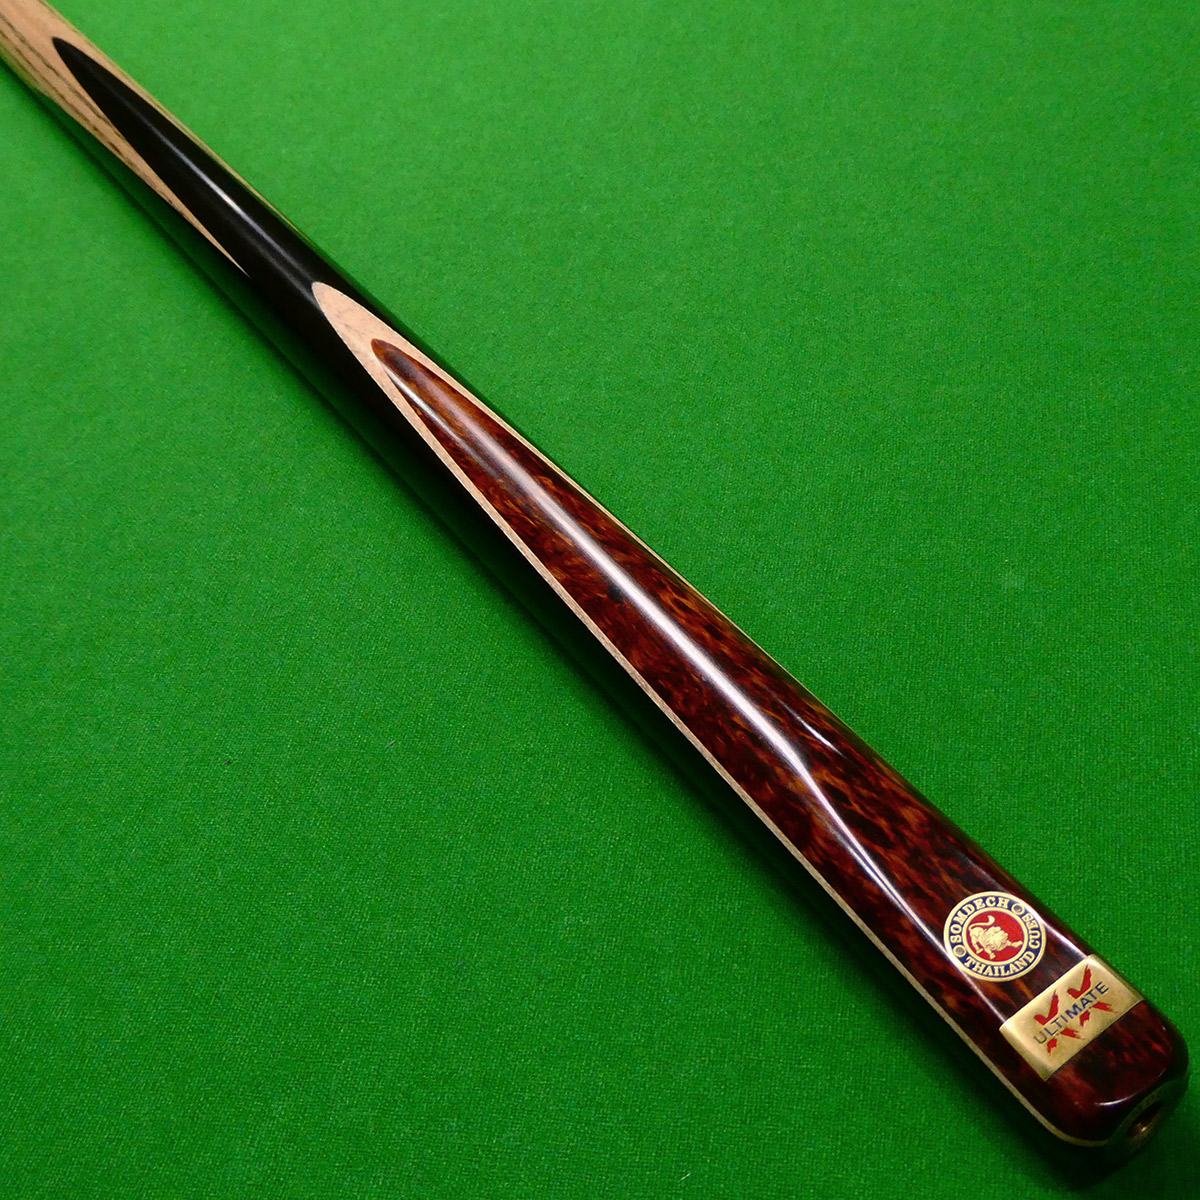 1pc Somdech Ultimate XX Snooker cue + King wood